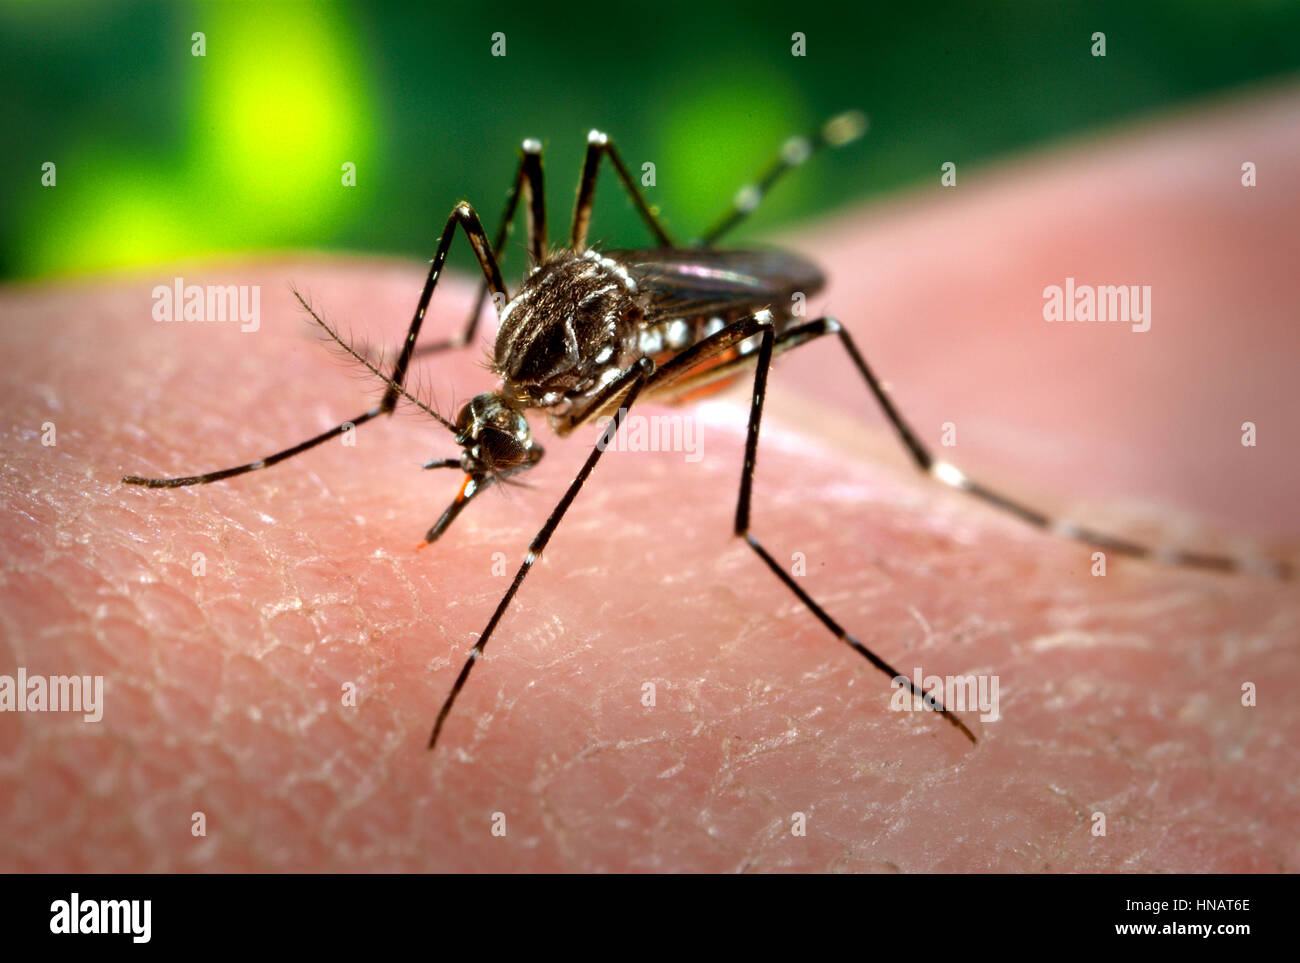 A female Aedes aegypti mosquito inserting her fascicle through the skin surface of her host.  The Aedes aegypti mosquito is the primary vector responsible for the transmission of the Flavivirus Dengue (DF), and Dengue hemorrhagic fever (DHF), the day-biting Aedes aegypti mosquito prefers to feed on its human hosts. Aedes aegypti also plays a major role as a vector for 'Yellow fever'. Frequently found in its tropical environs, the white banded markings on the tarsal segments of its jointed legs, though distinguishing it as Aedes aegypti, are similar to some other mosquito species. Stock Photo